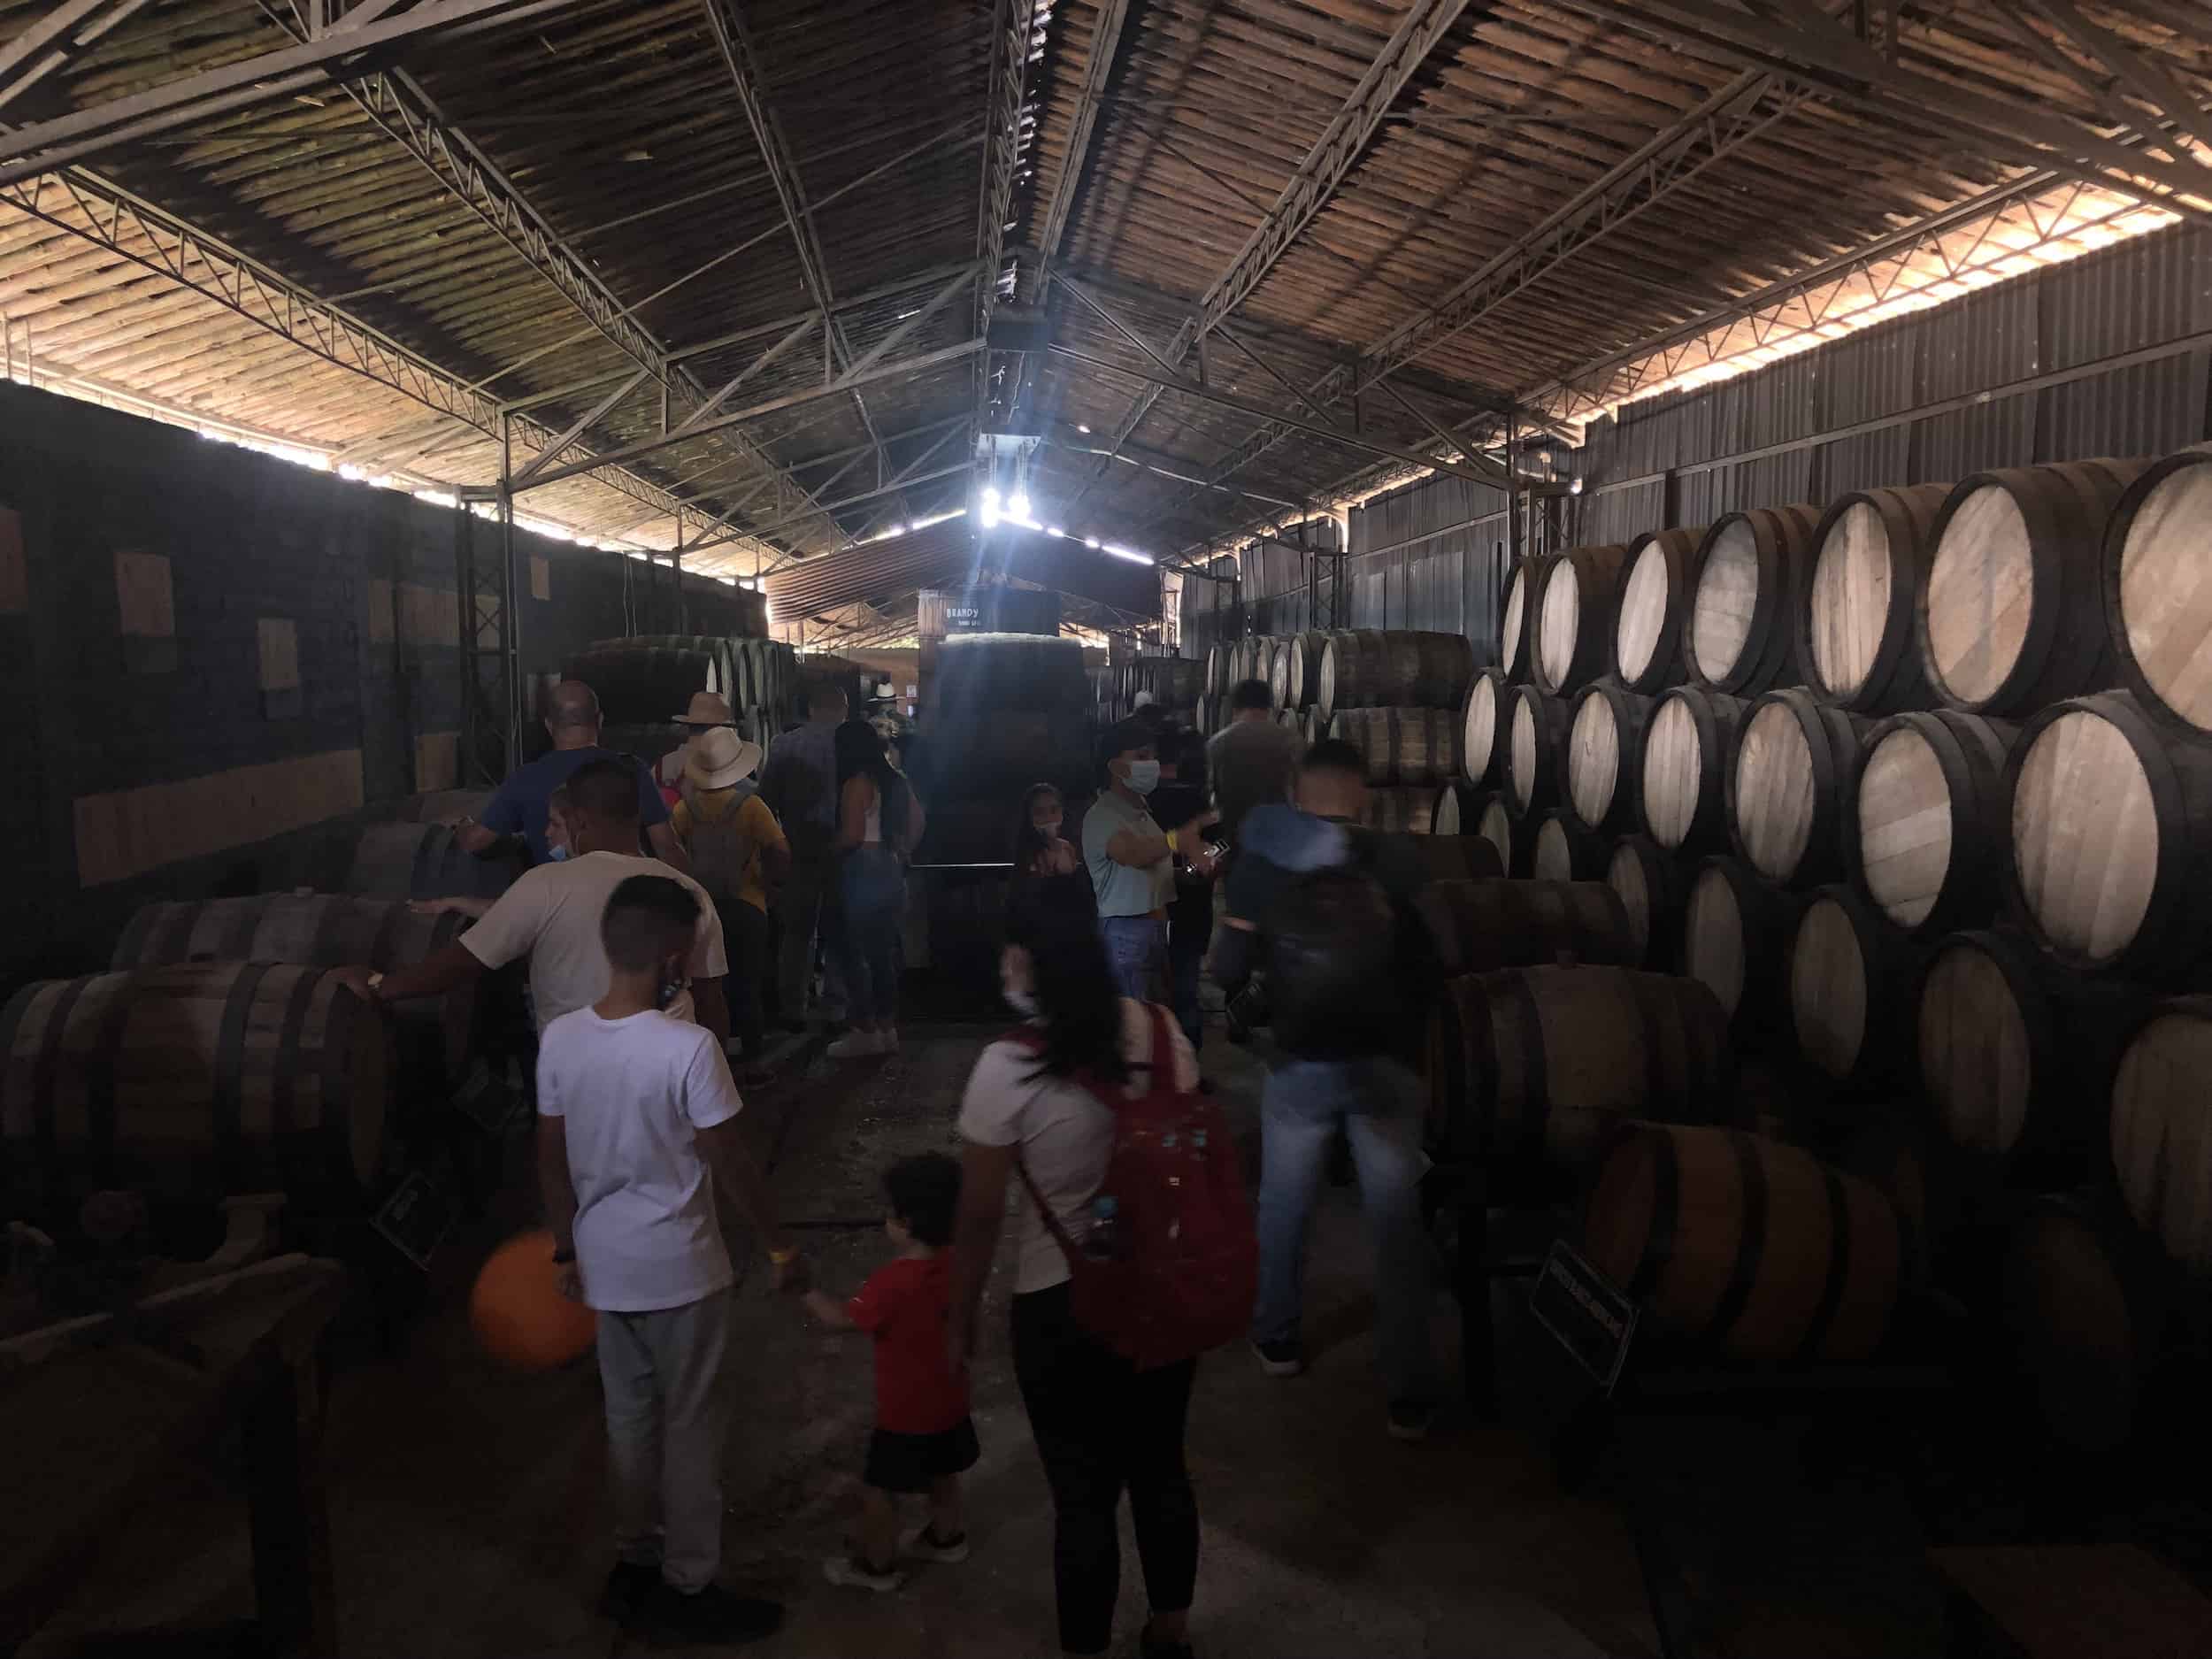 Barrel room at Grape and Wine Museum